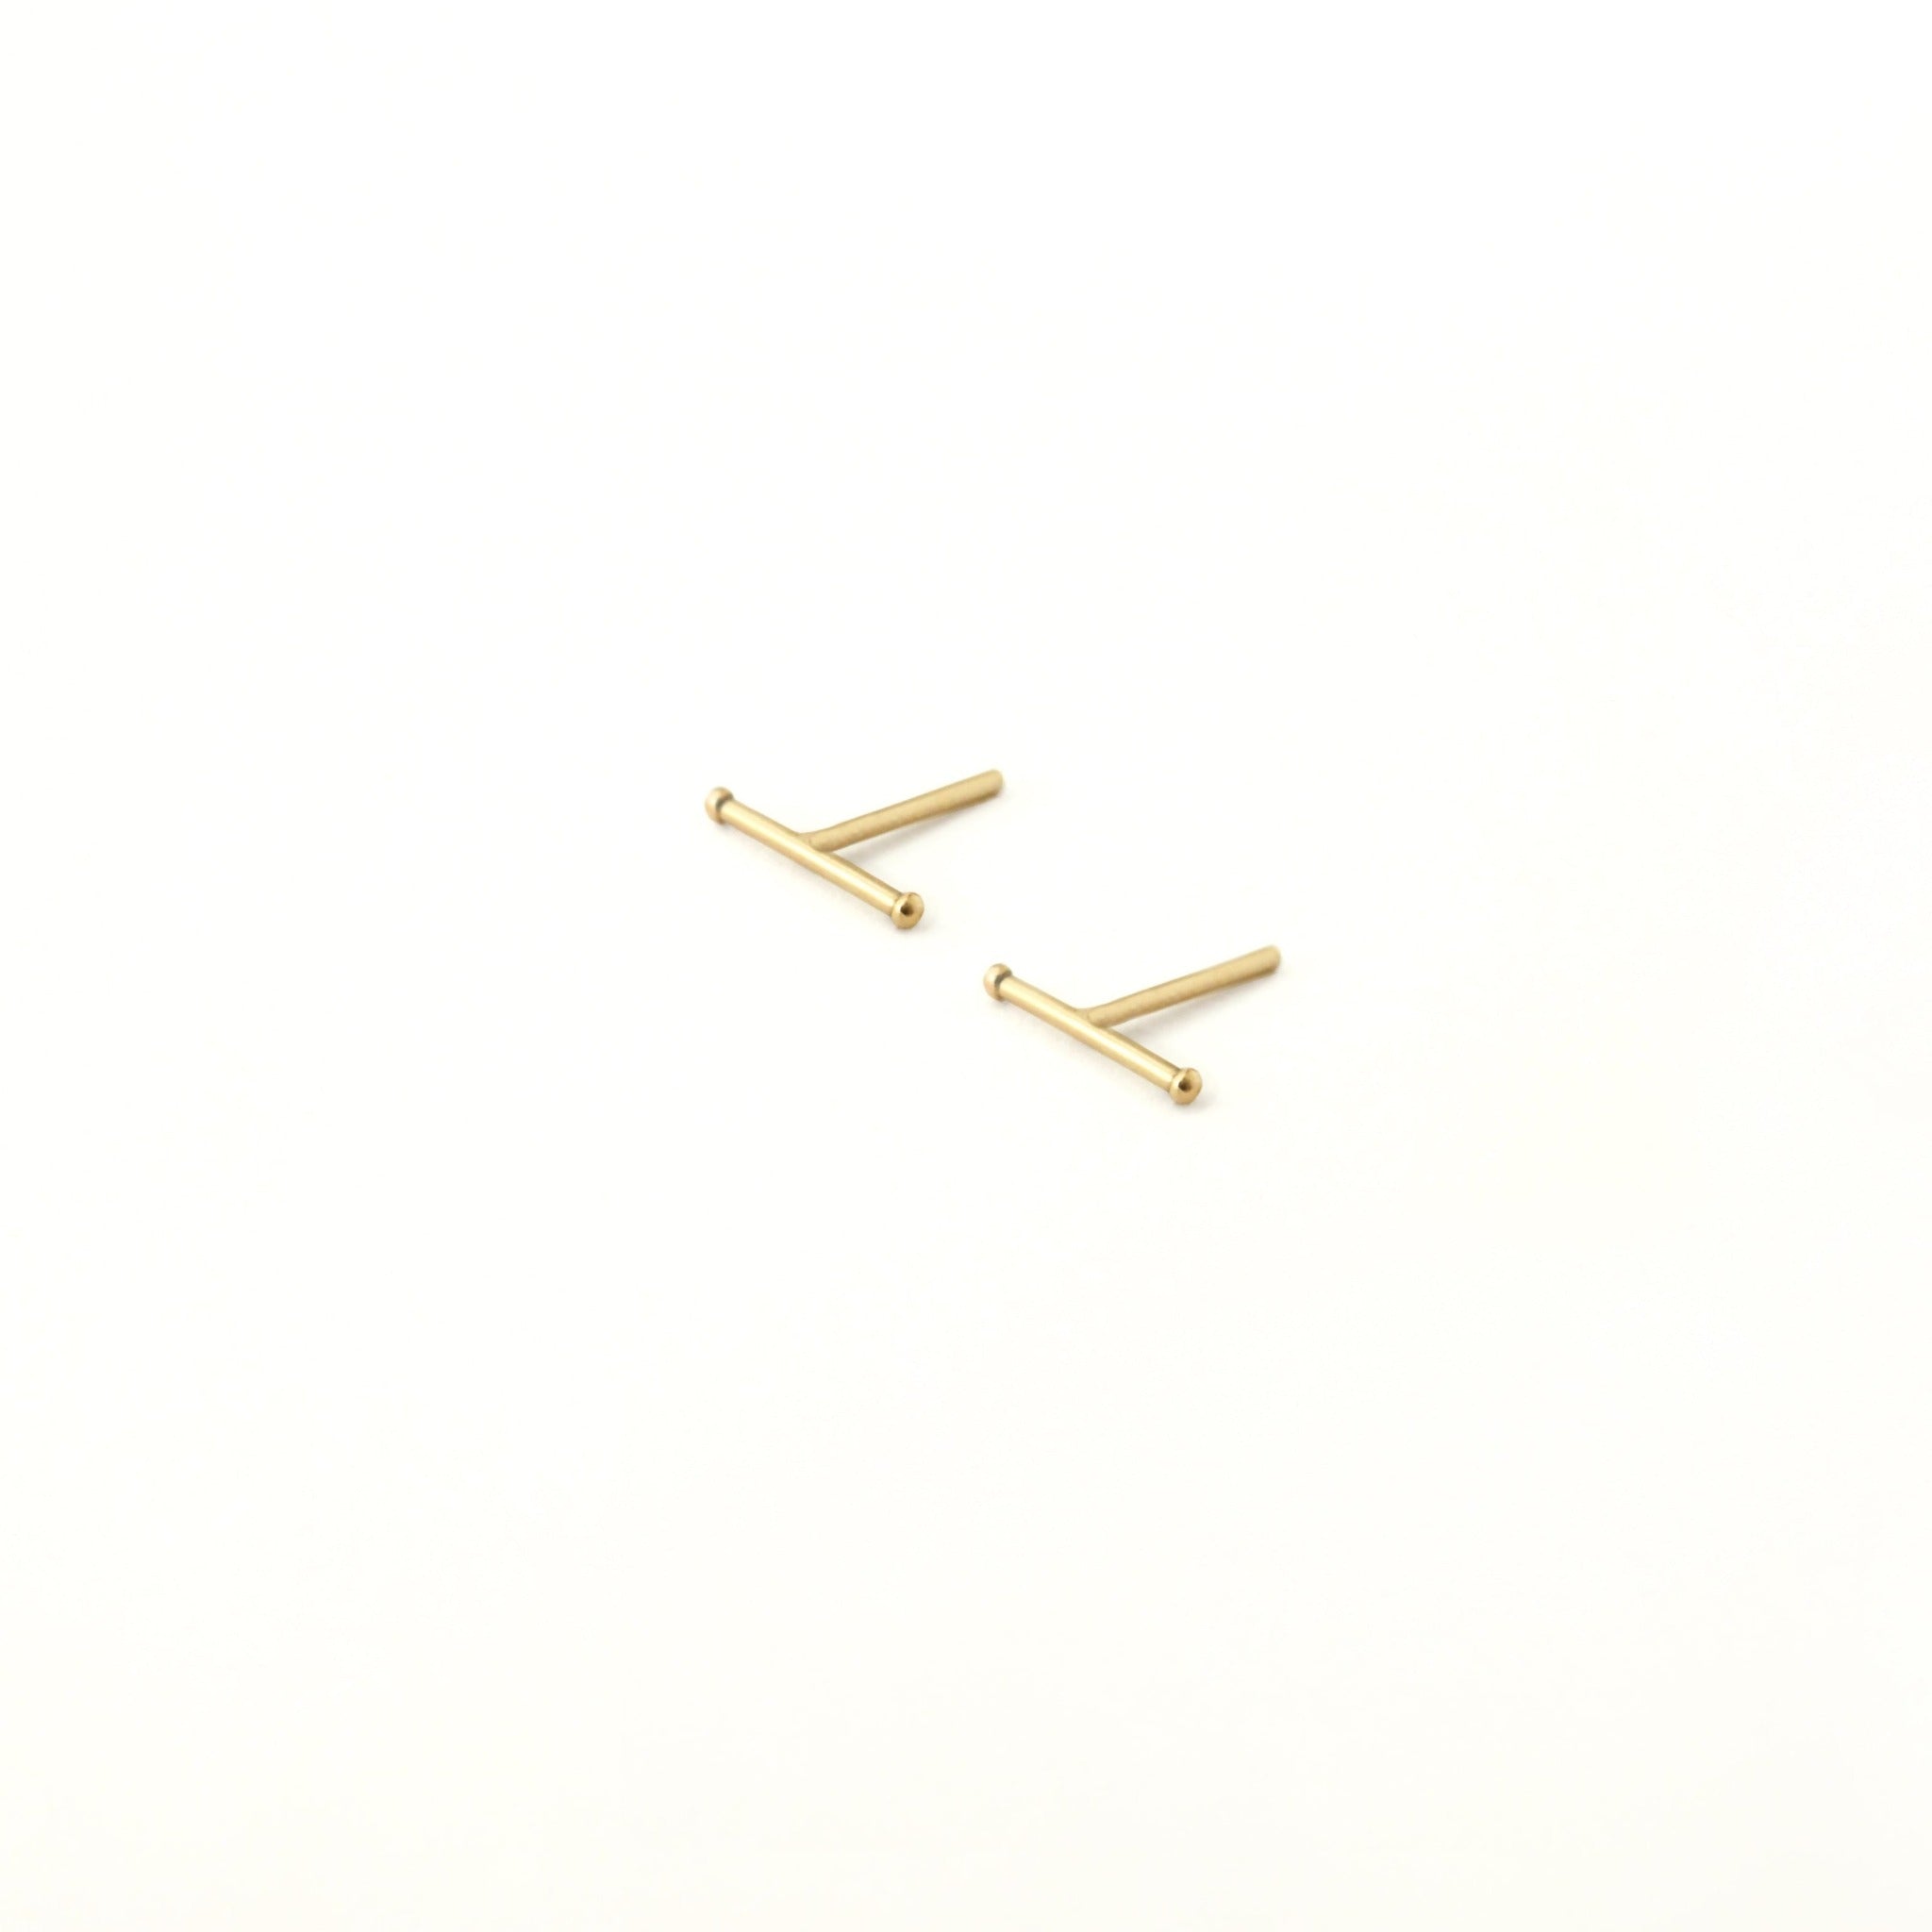 Barely there gold bar earrings. The ends have little round gold balls.